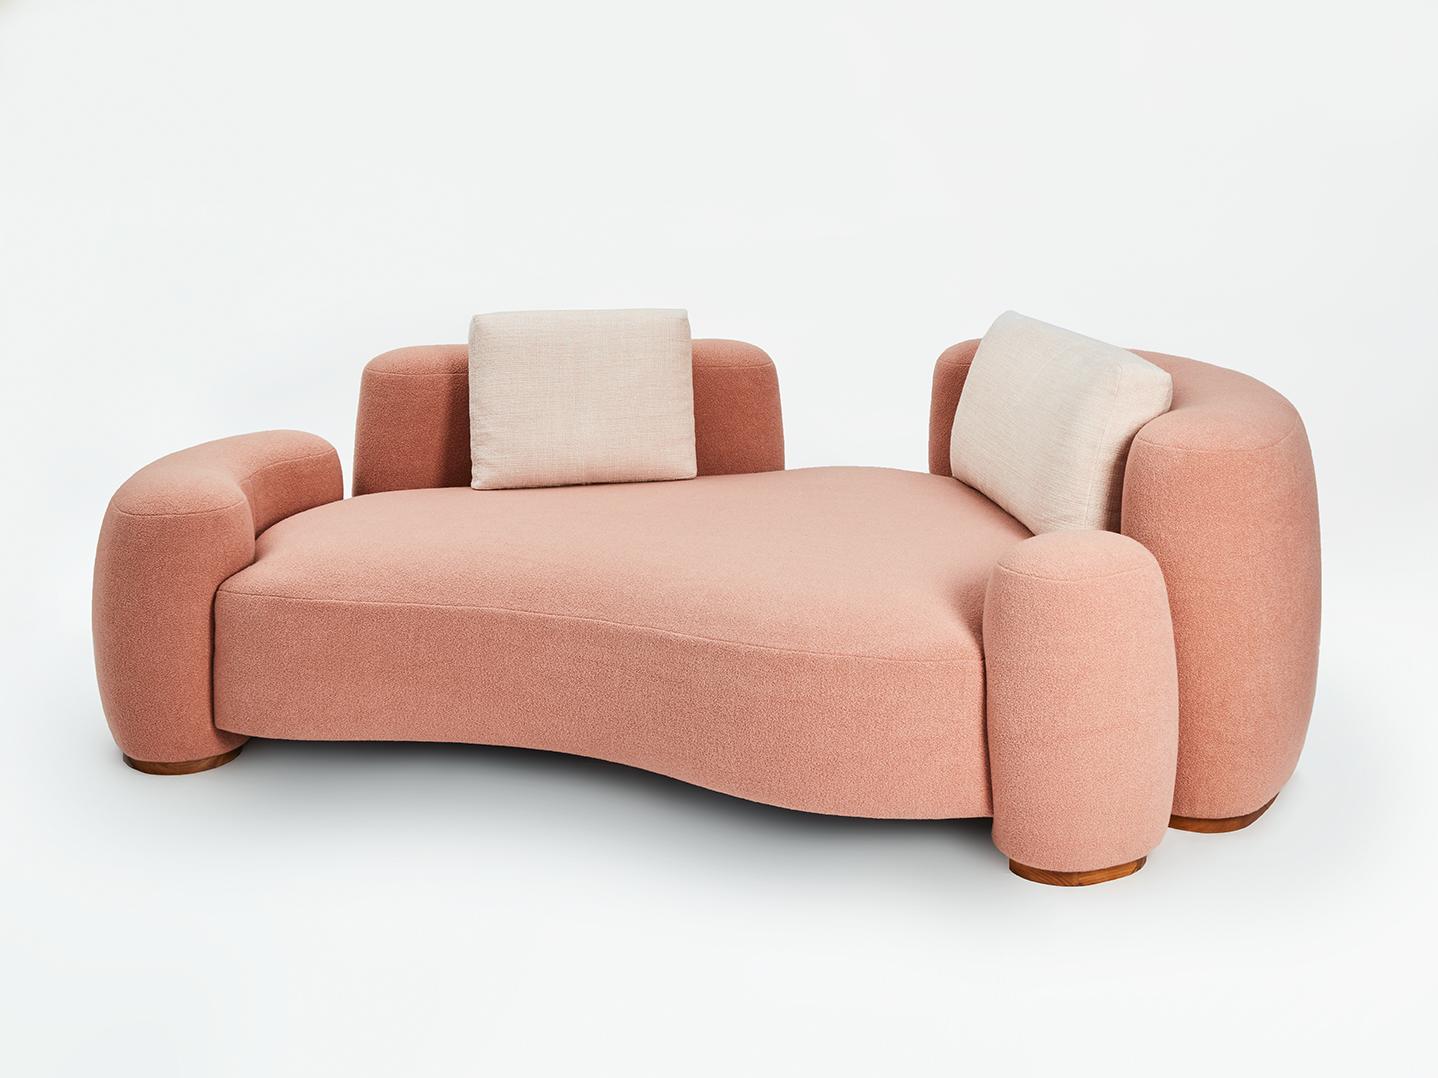 Pink Baba daybed by Gisbert Pöppler
Dimensions: H 82 (43) x W 250 x D 170 cm
Materials: Upholstered wooden frame, teak footings

Like a friend that wants to cuddle, Baba is an upholstered sofa series for lounging in complete comfort. The